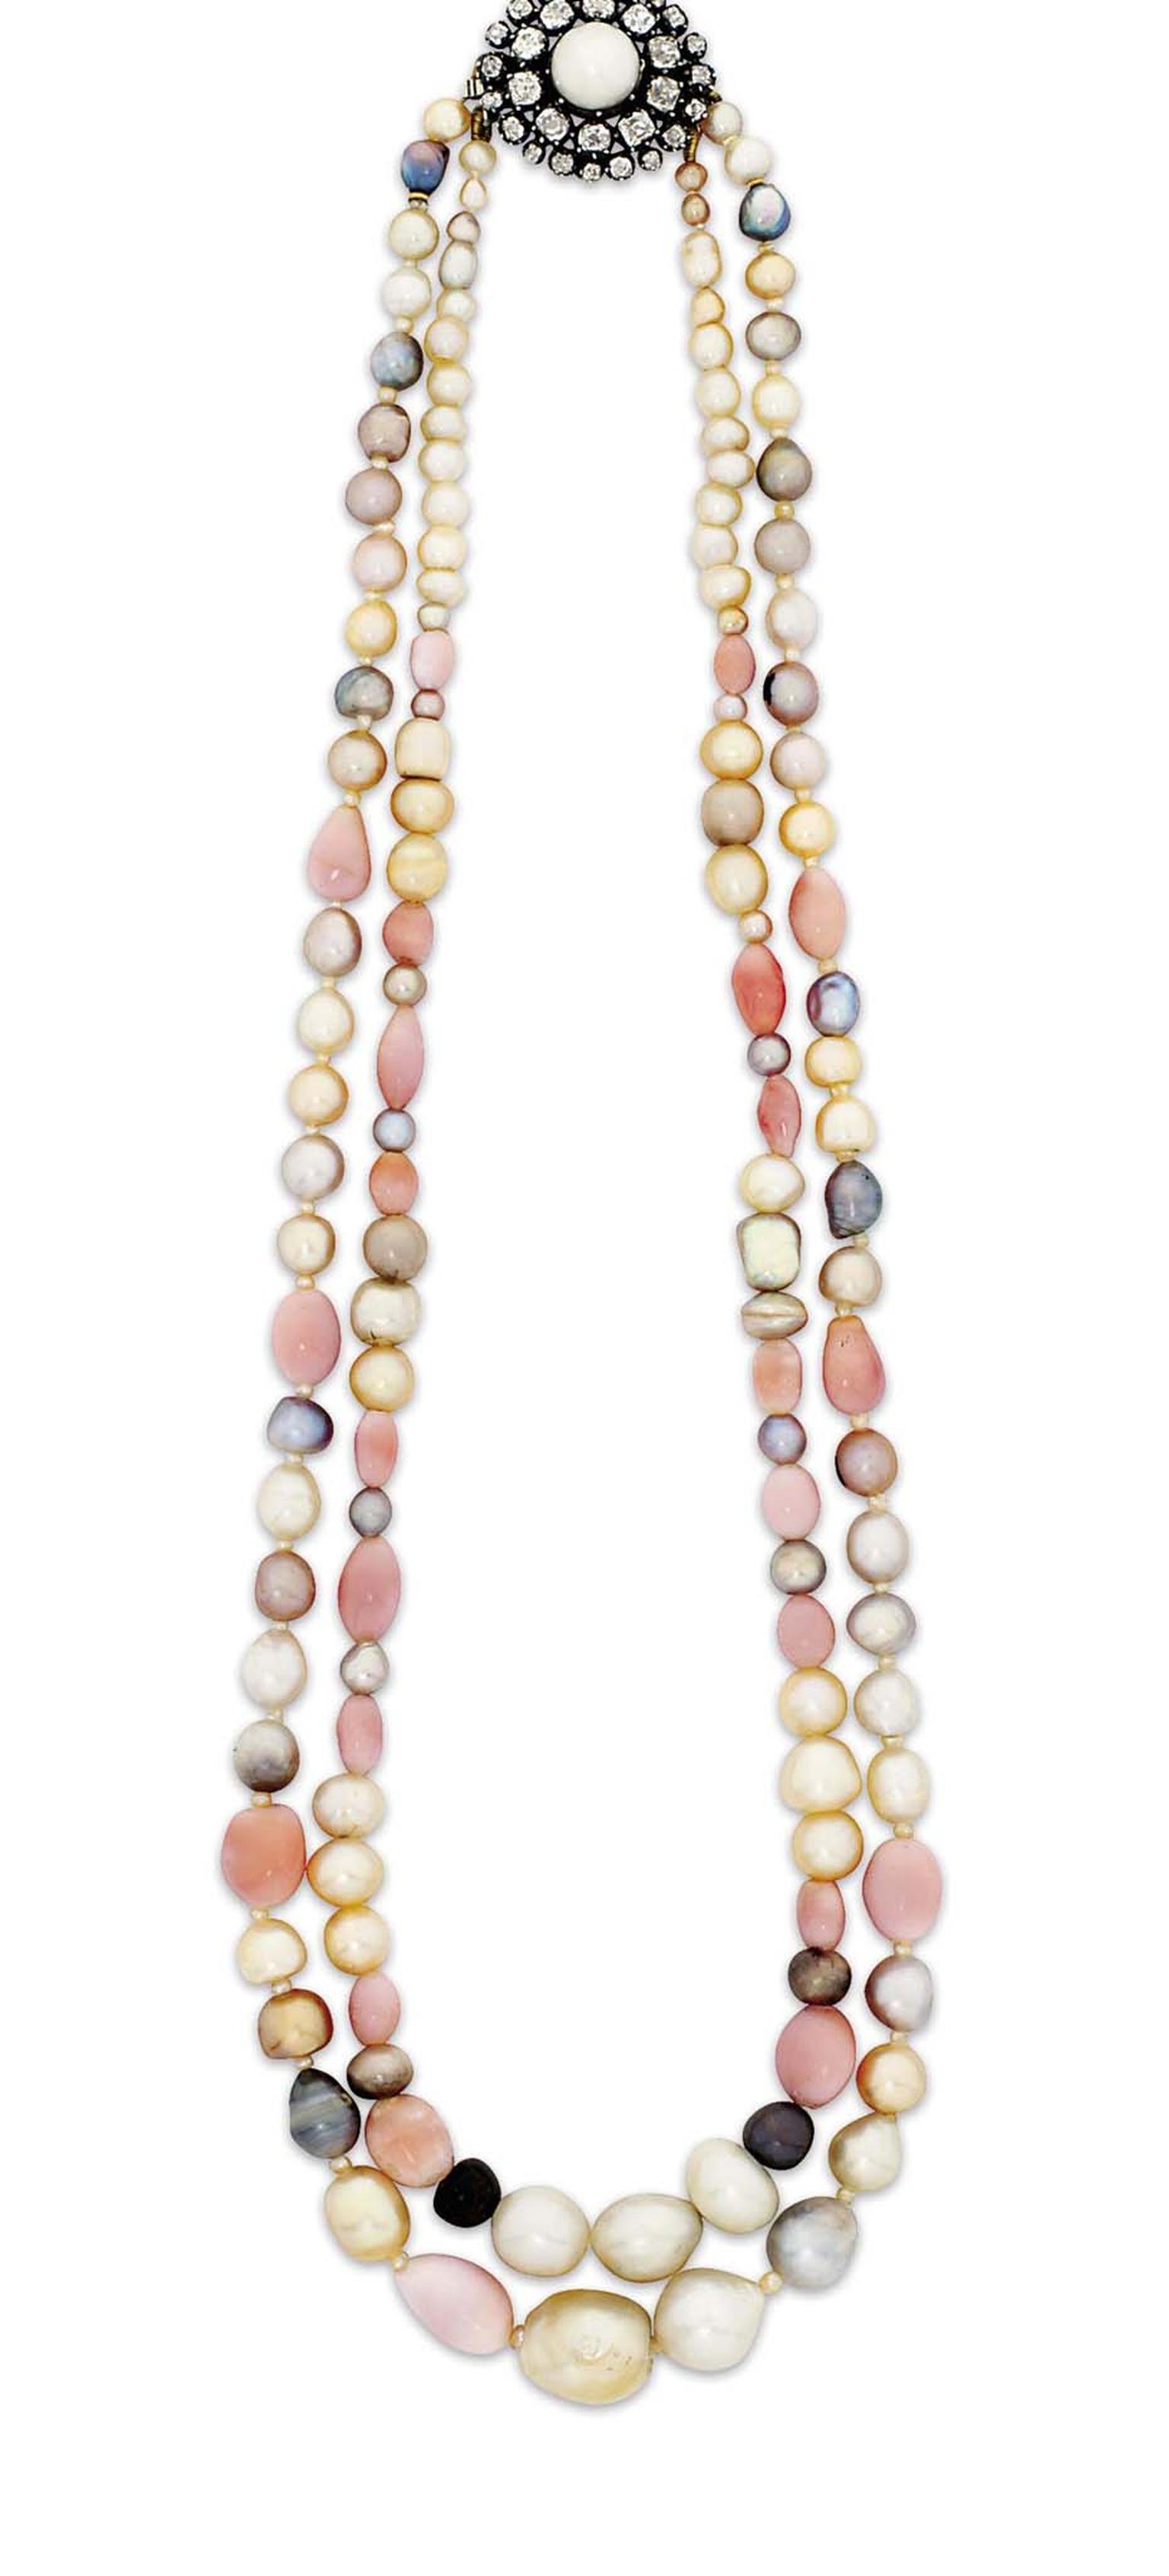 A late 19th century natural pearl and conch pearl necklace sold for £11,875 at Christie’s Important Jewels sale in London last autumn.